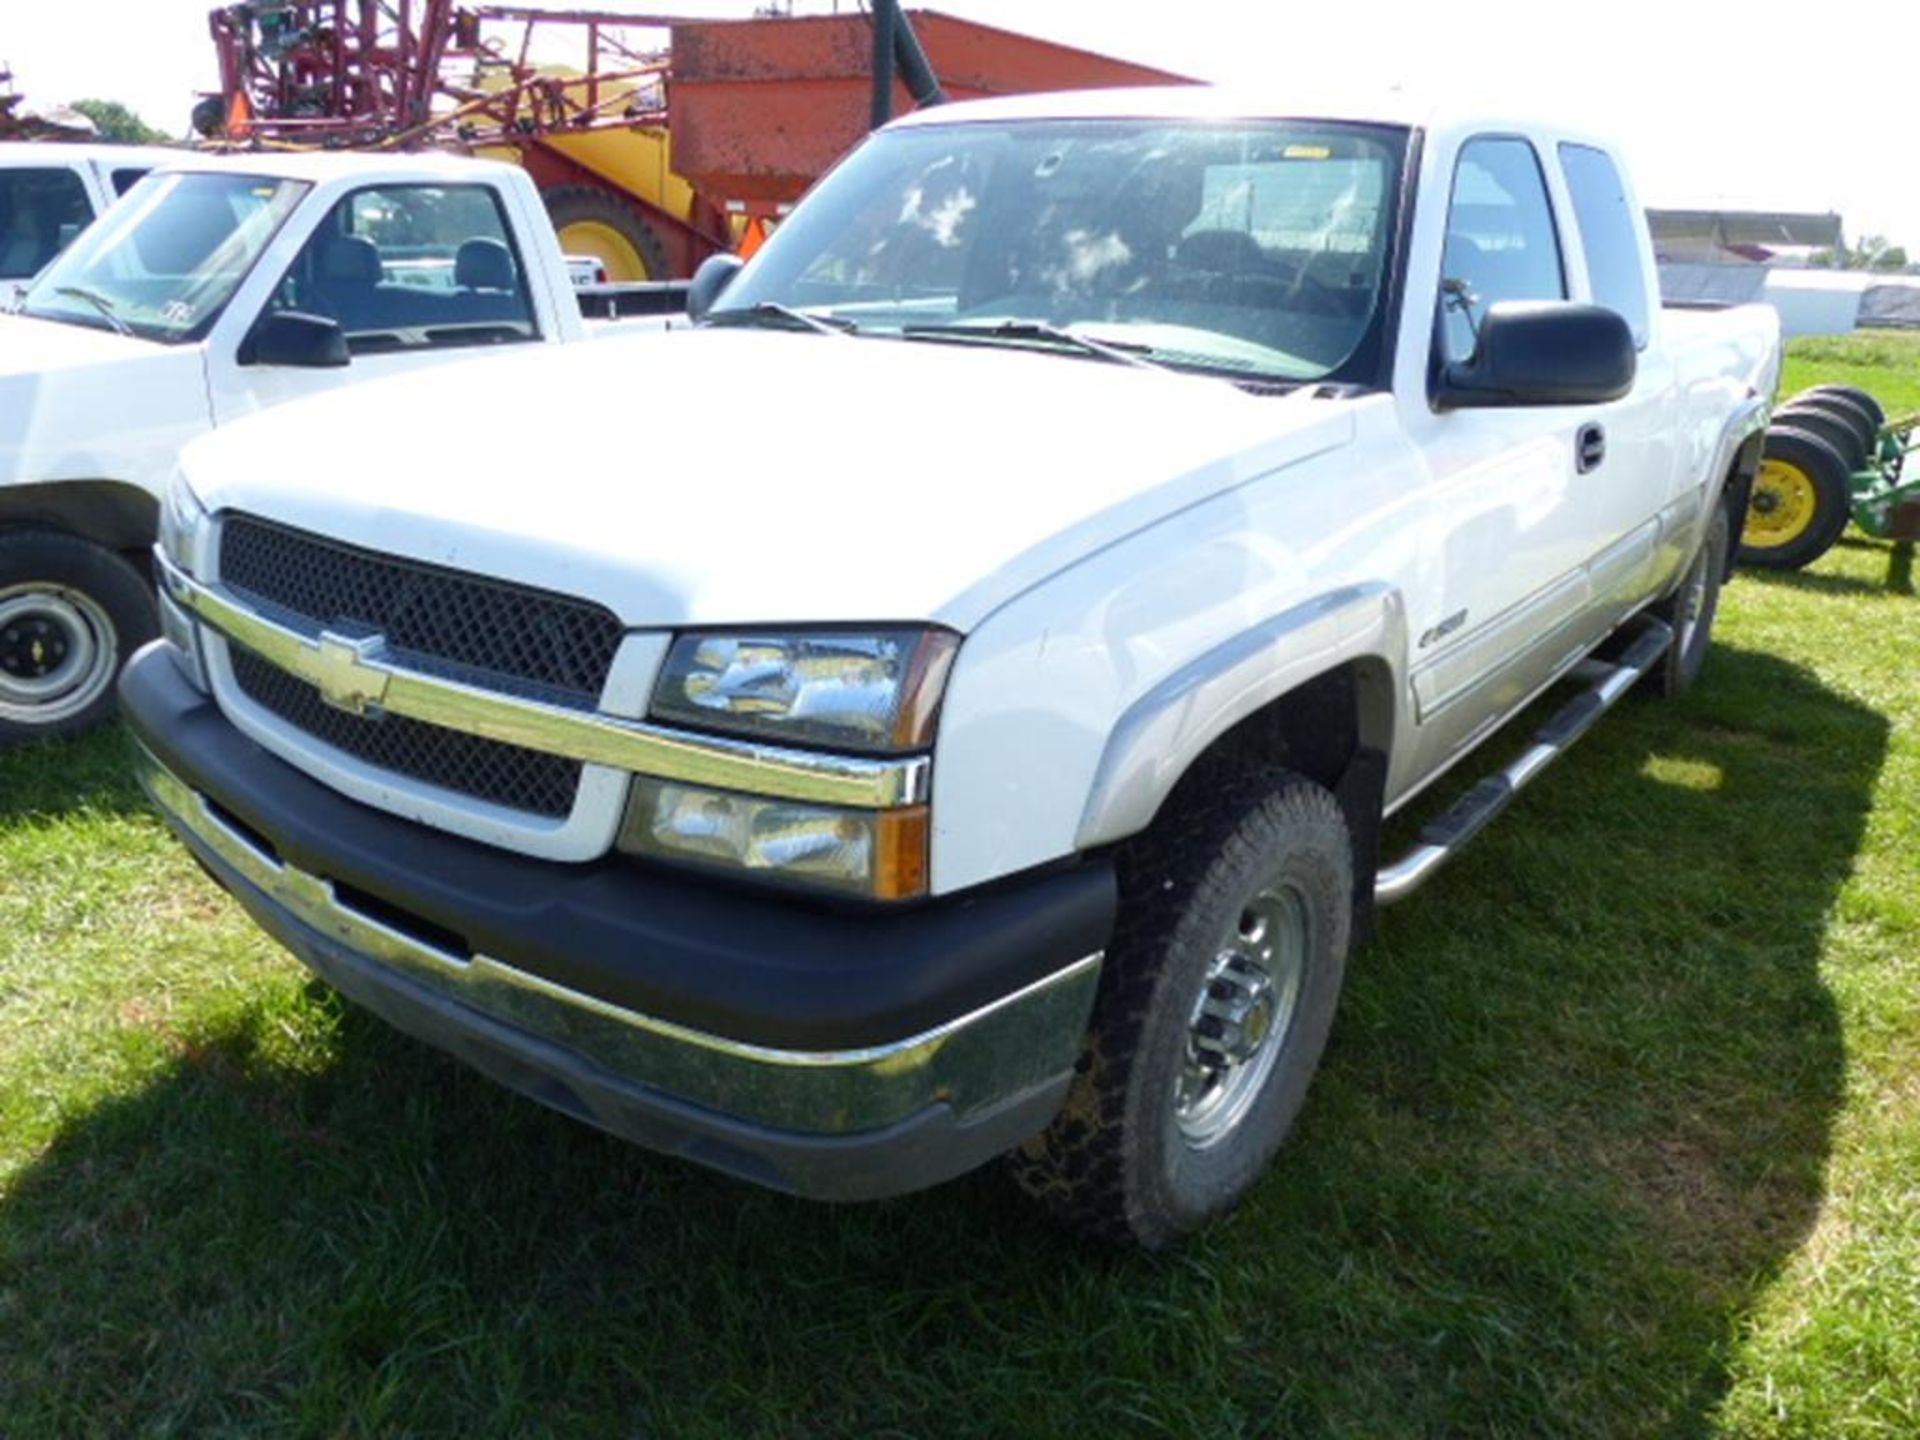 2004 CHEVY 2500 EXT CAB 4WD PICKUP, 6' BED, WHITE, NERF BARS, HITCH, SILVER TRIM,V-8, AUTO, CLOTH